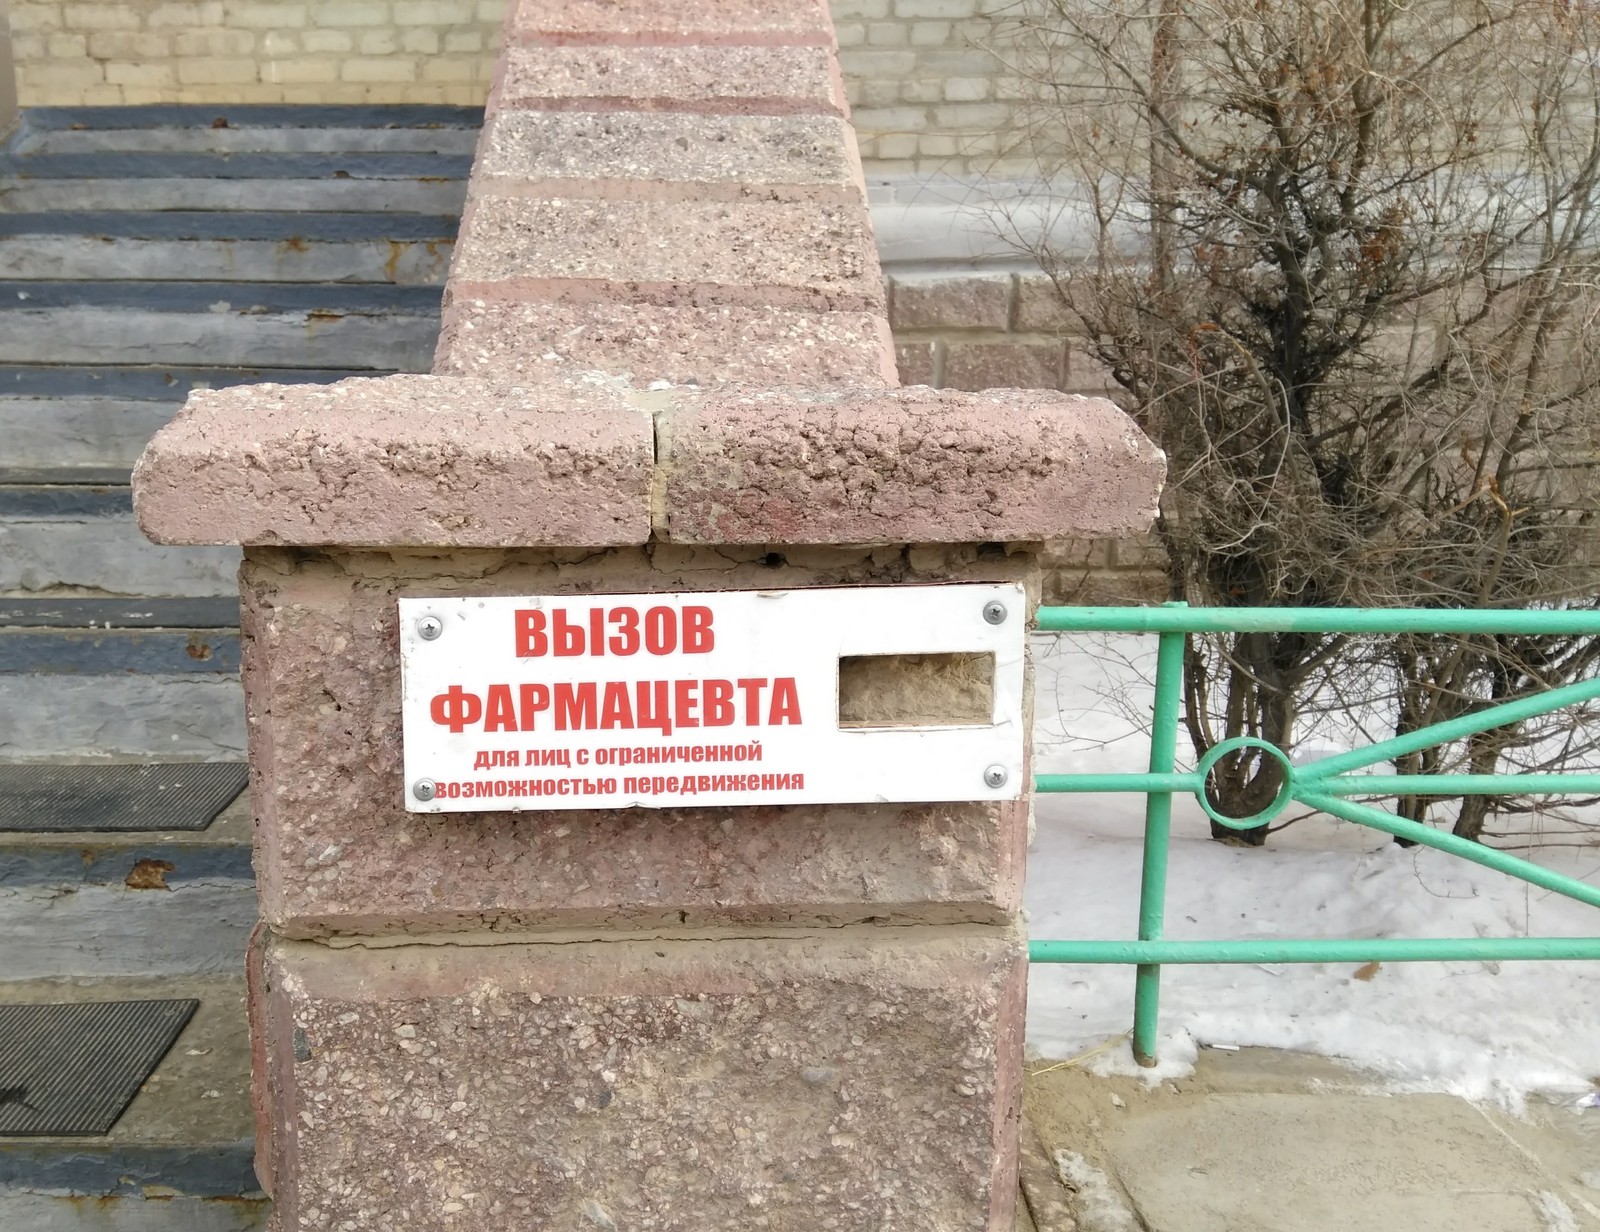 Everything for people. - My, Baikonur, Convenience, Pharmacy, call button, Stairs